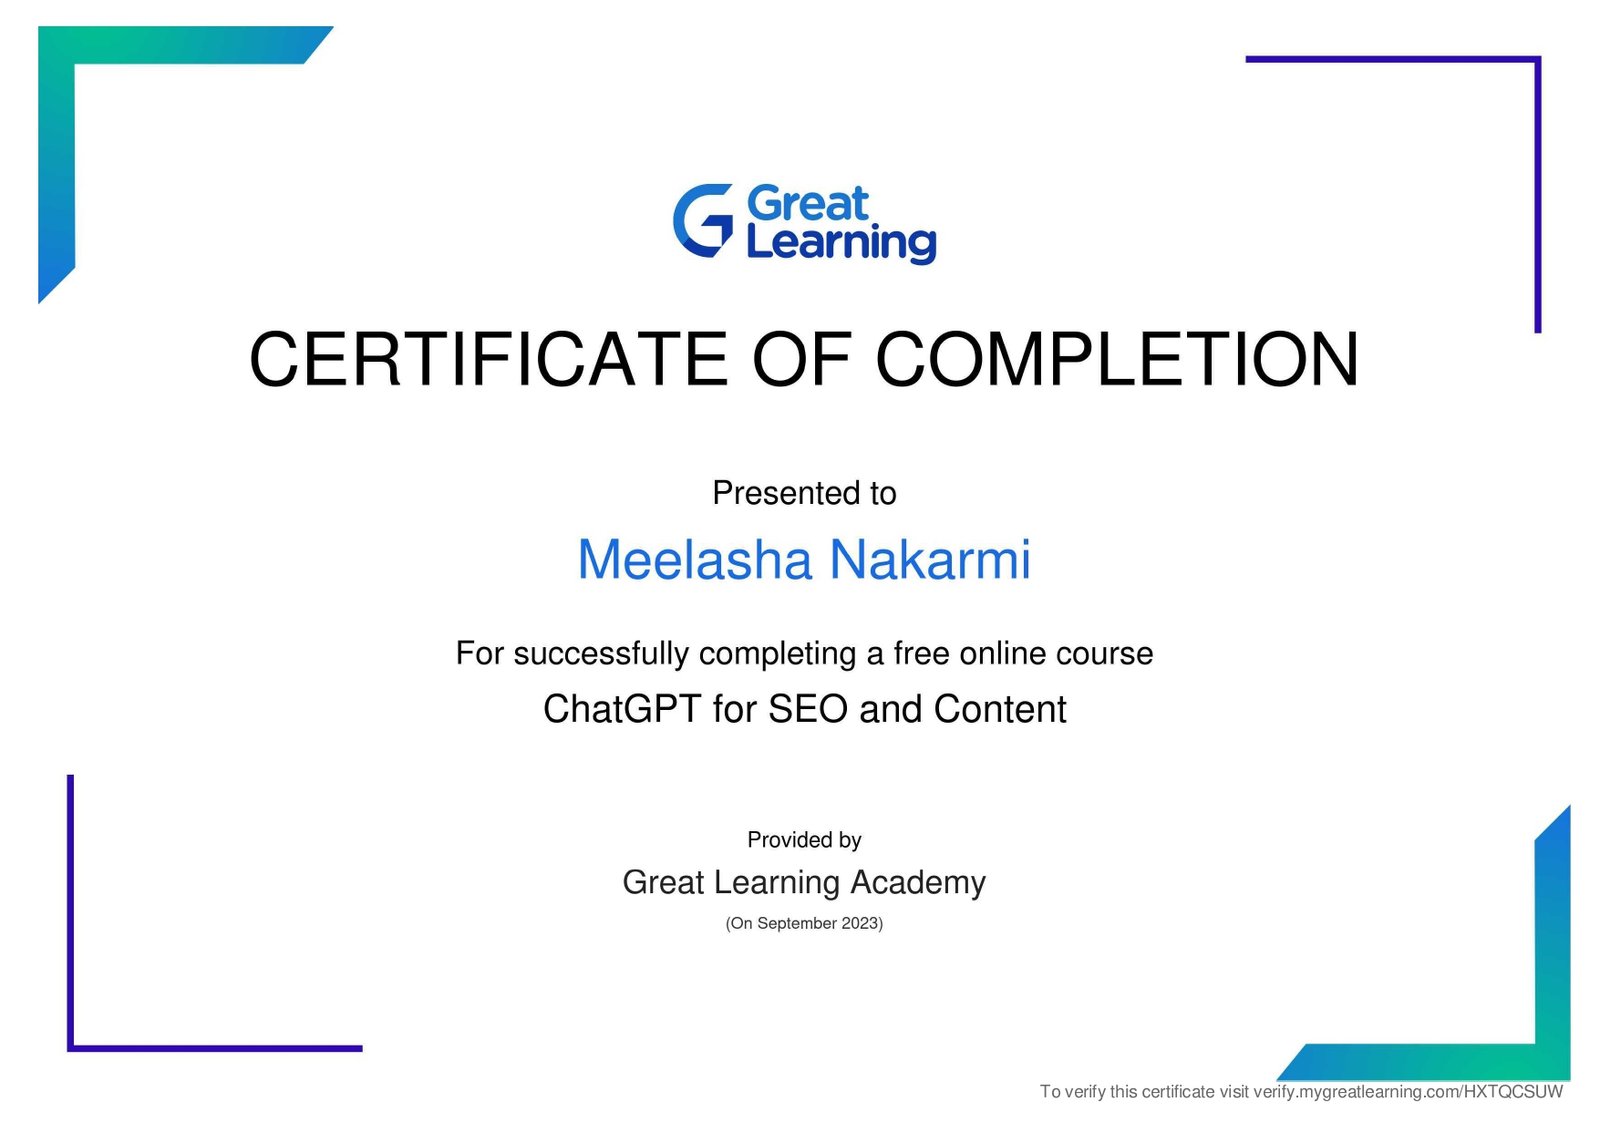 ChatGPT for SEO and Content free certificate